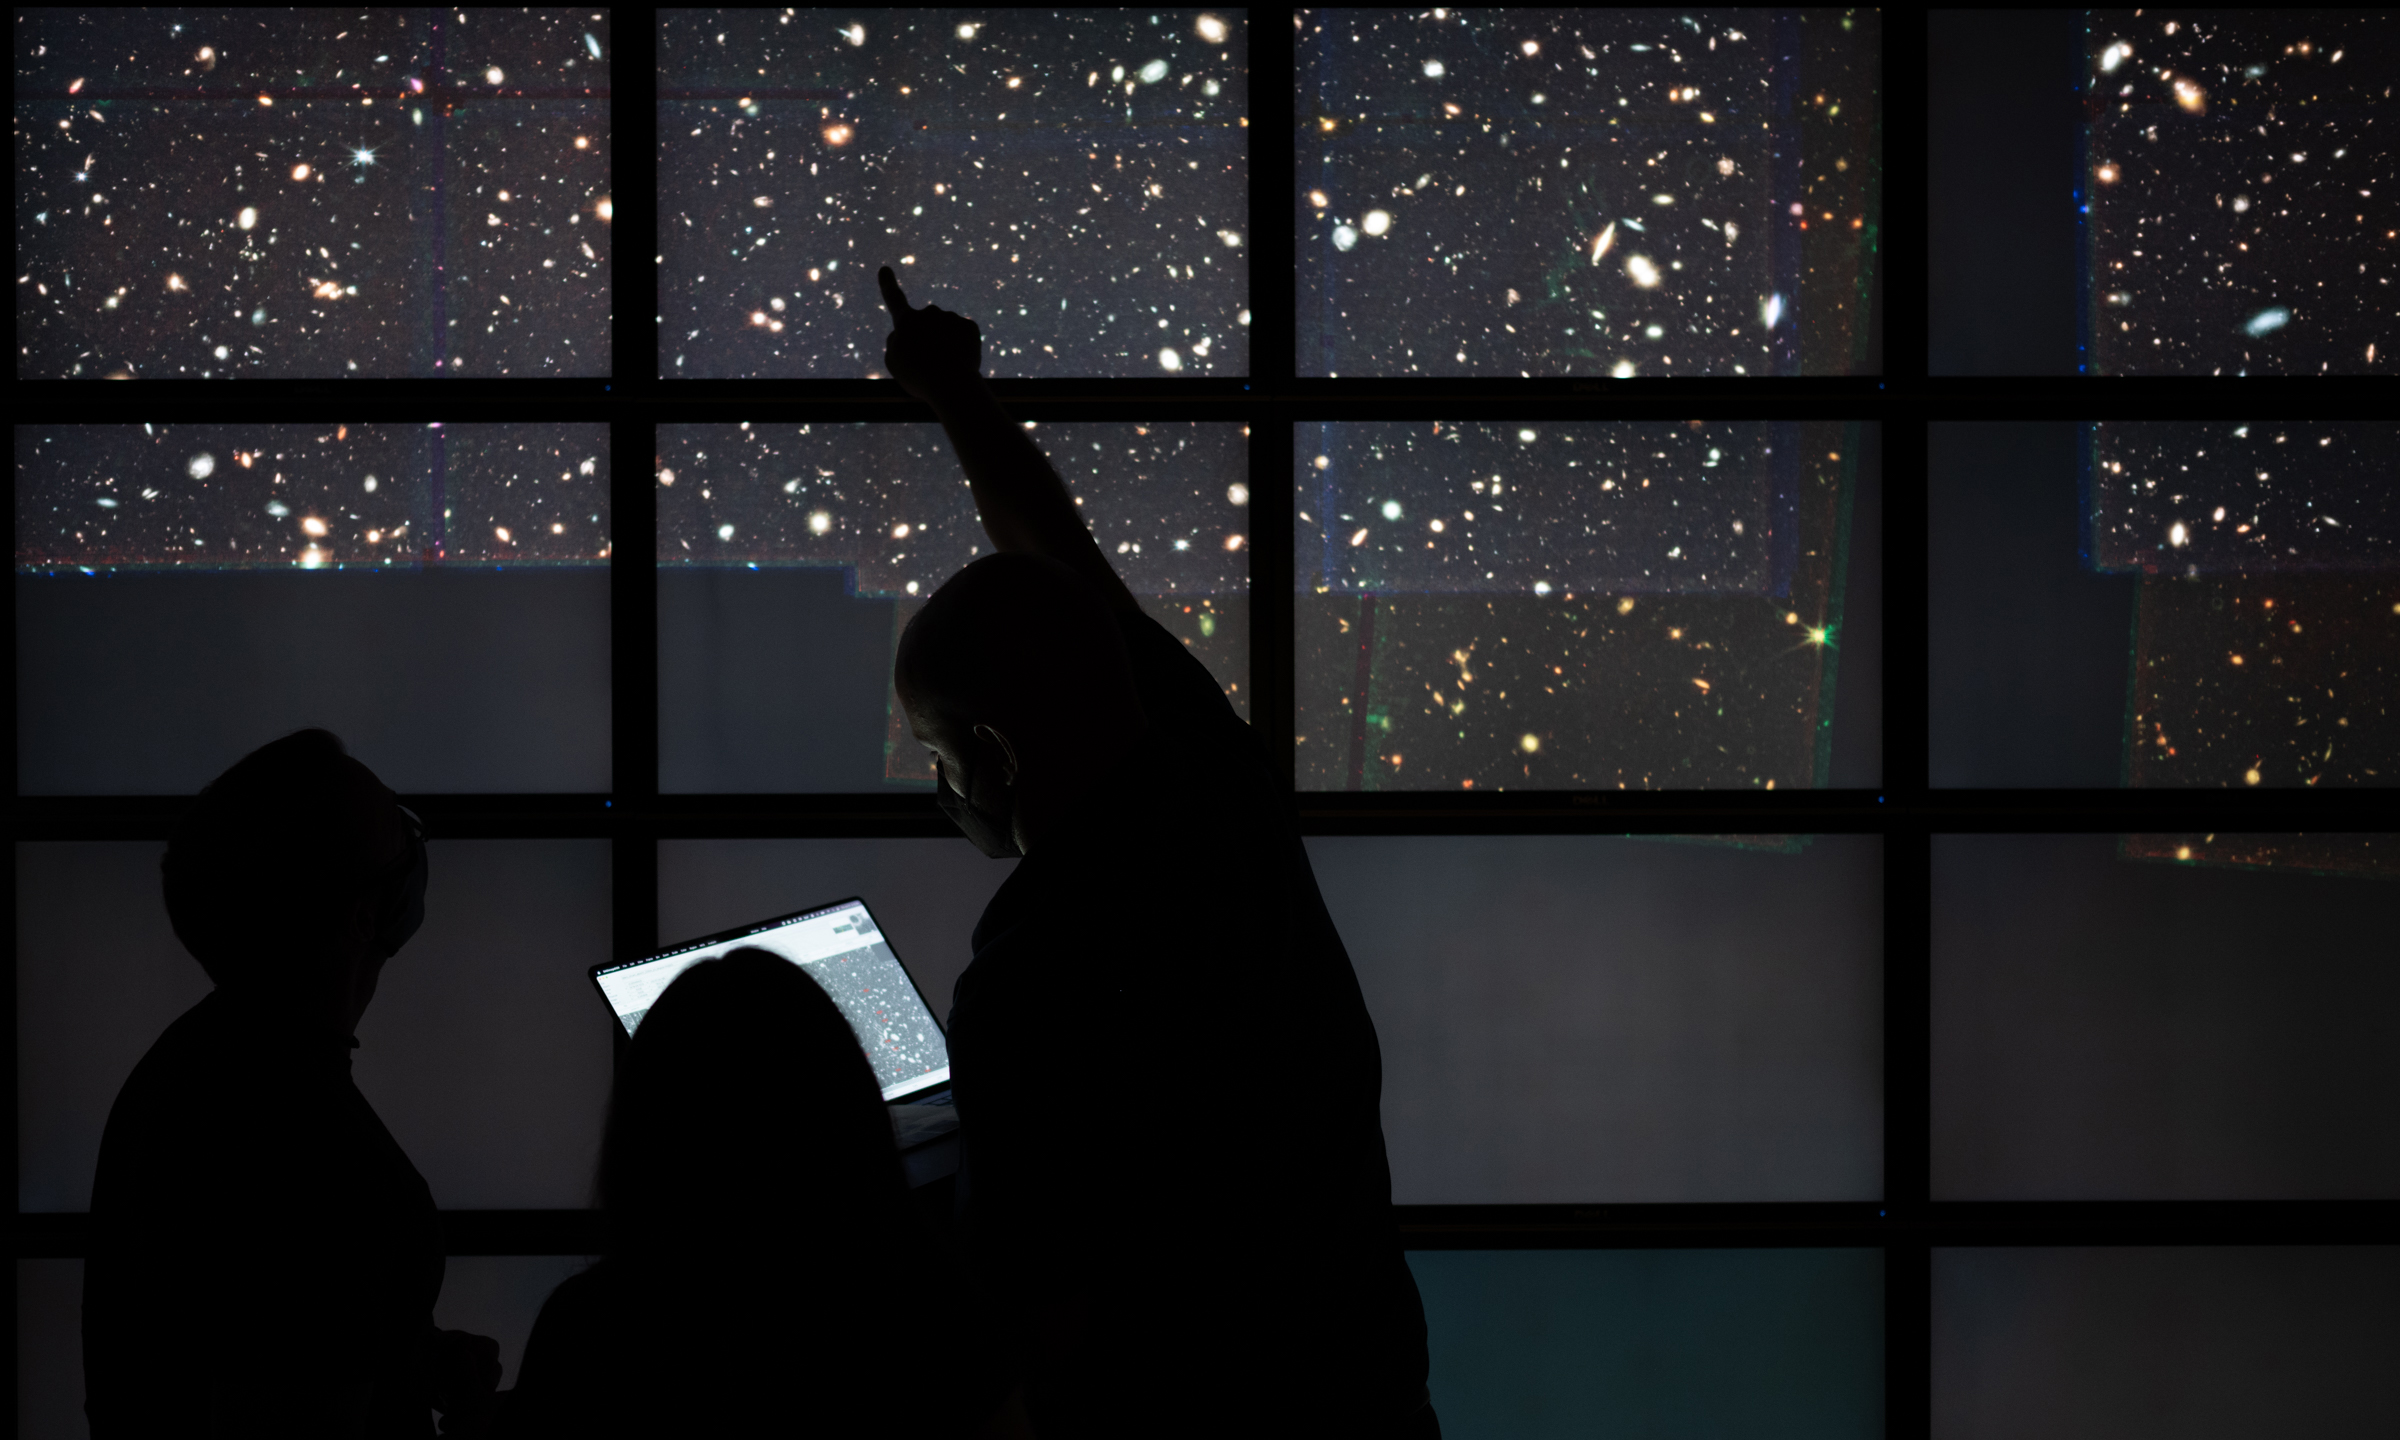 Silhouettes of three people in front of a large display of stars and galaxies, one person pointing at a specific spot